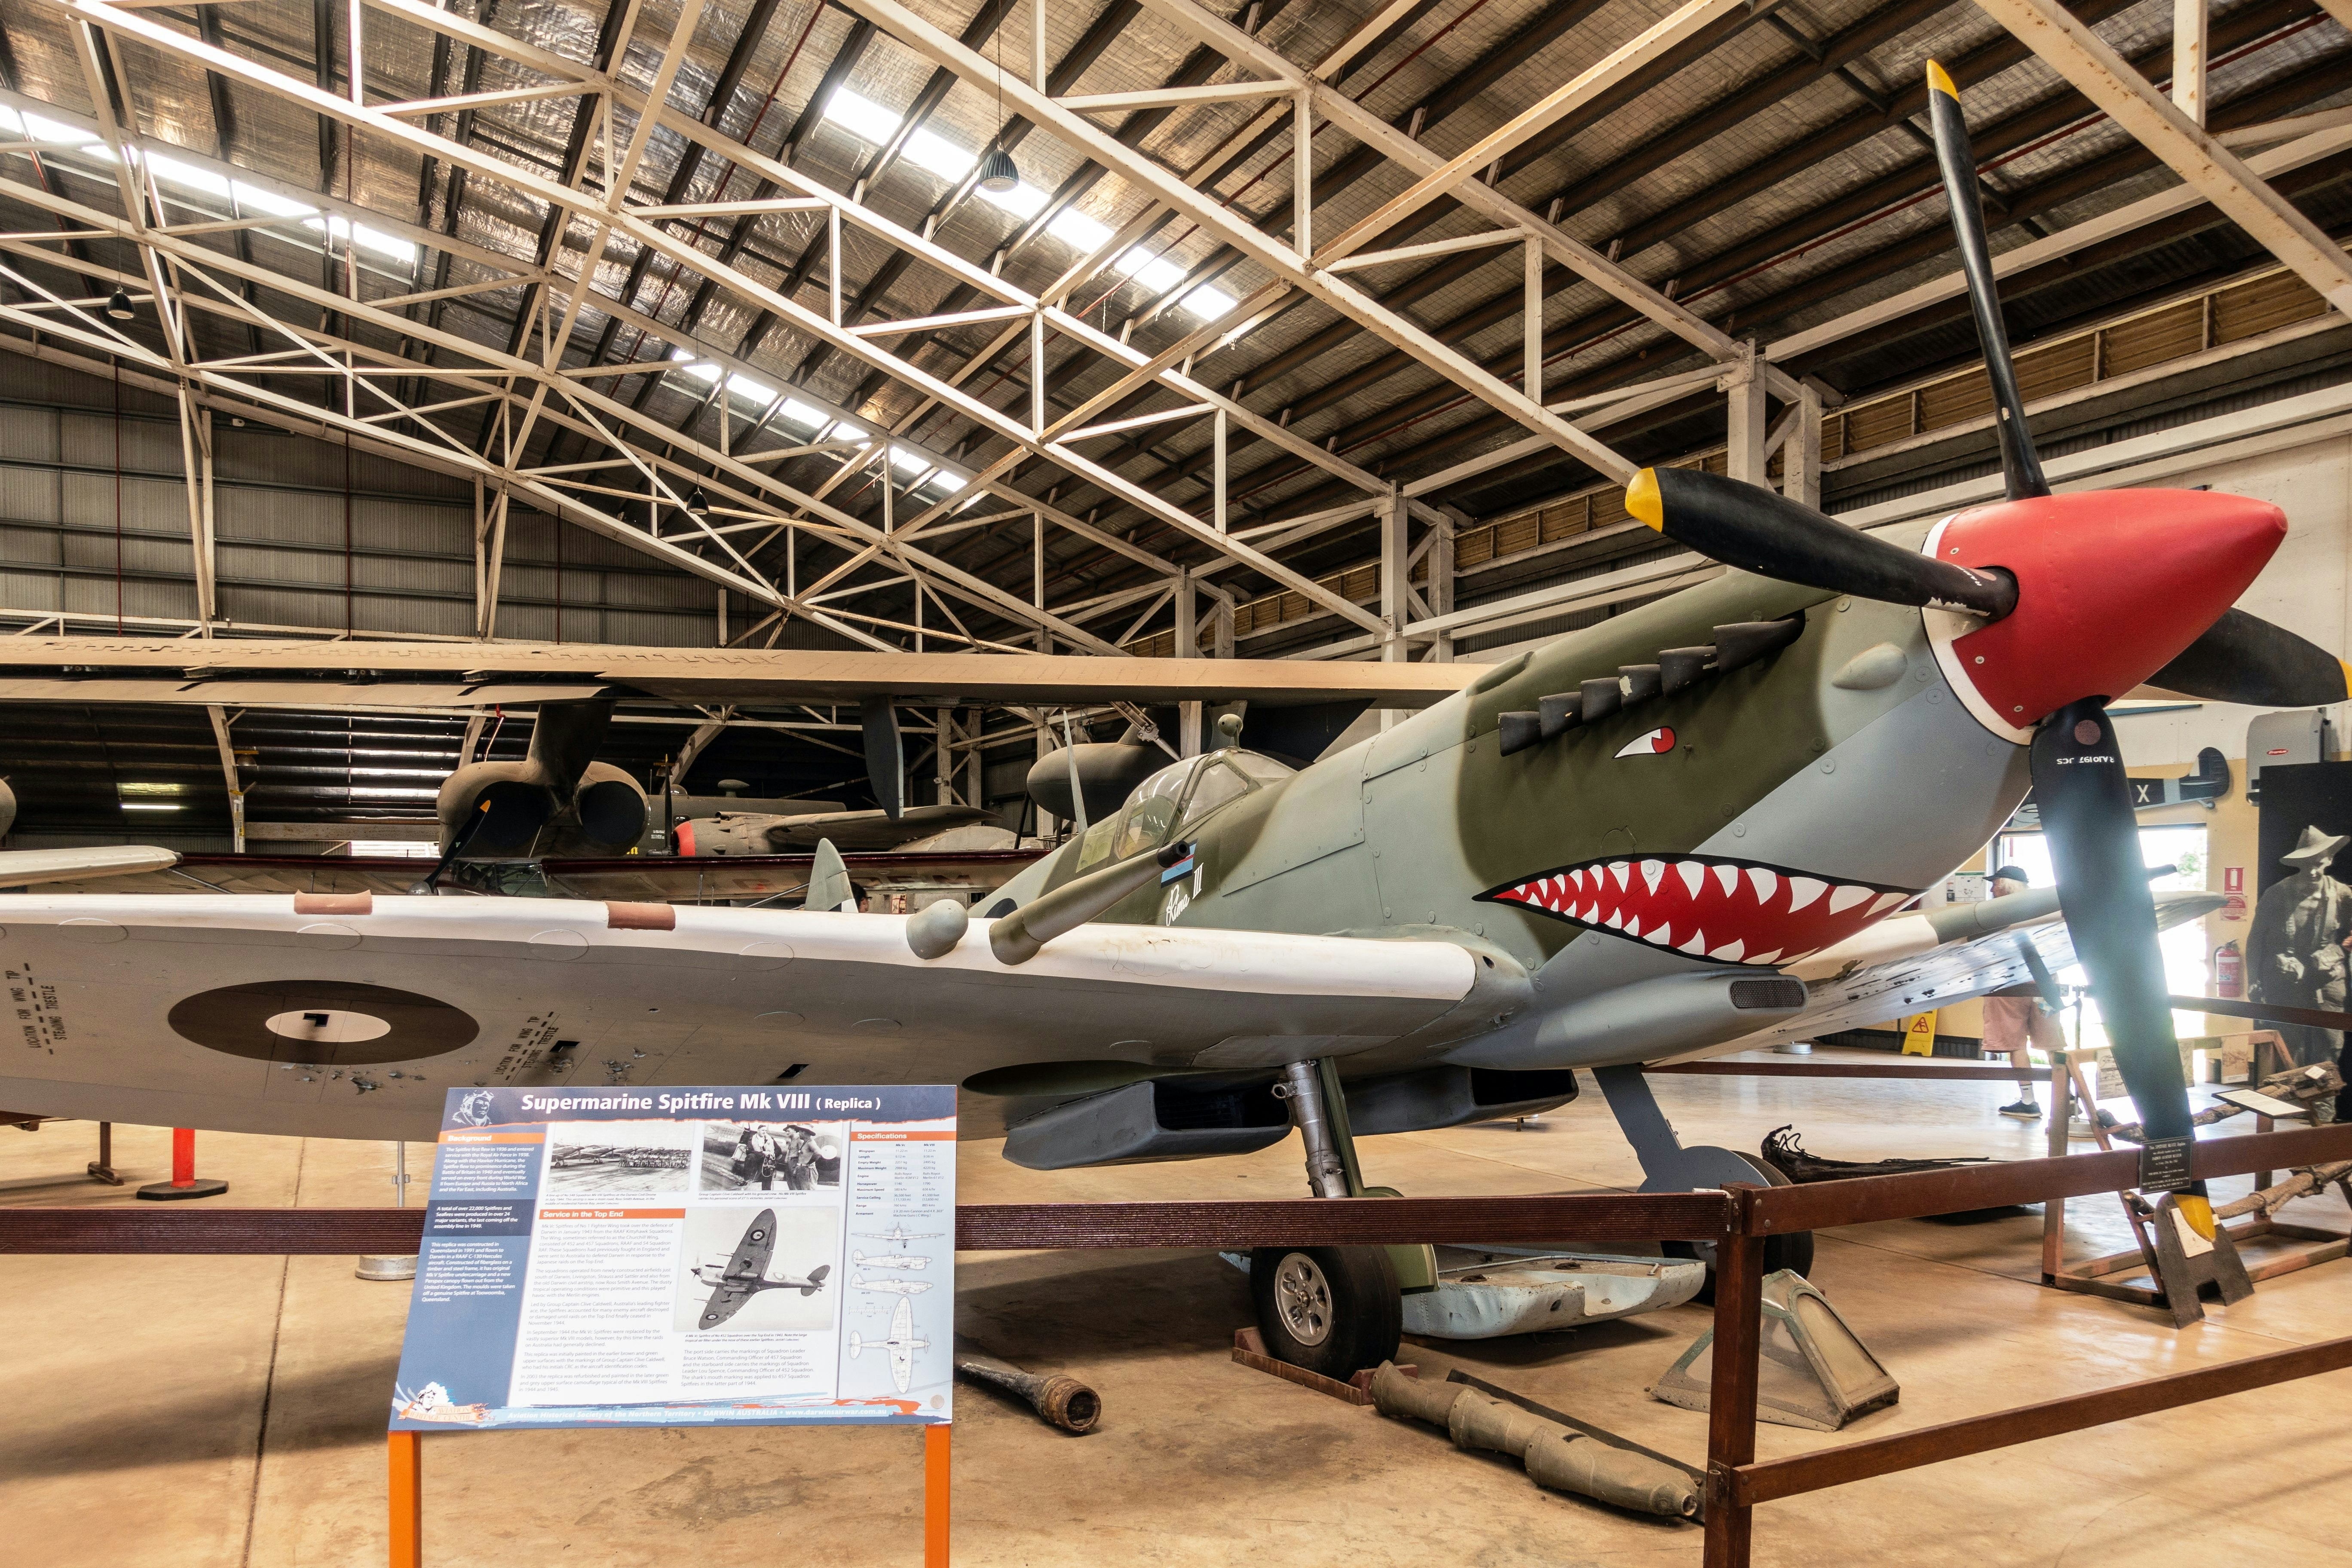 Darwin Australia - February 22, 2019: Australian Aviation Heritage Centre. The Supermarine Spitfire MK VIII with shark face painted in front.
Darwin Aviation Museum

; Shutterstock ID 1381715885; your: Bridget Brown; gl: 65050; netsuite: Online Editorial; full: POI Image Update